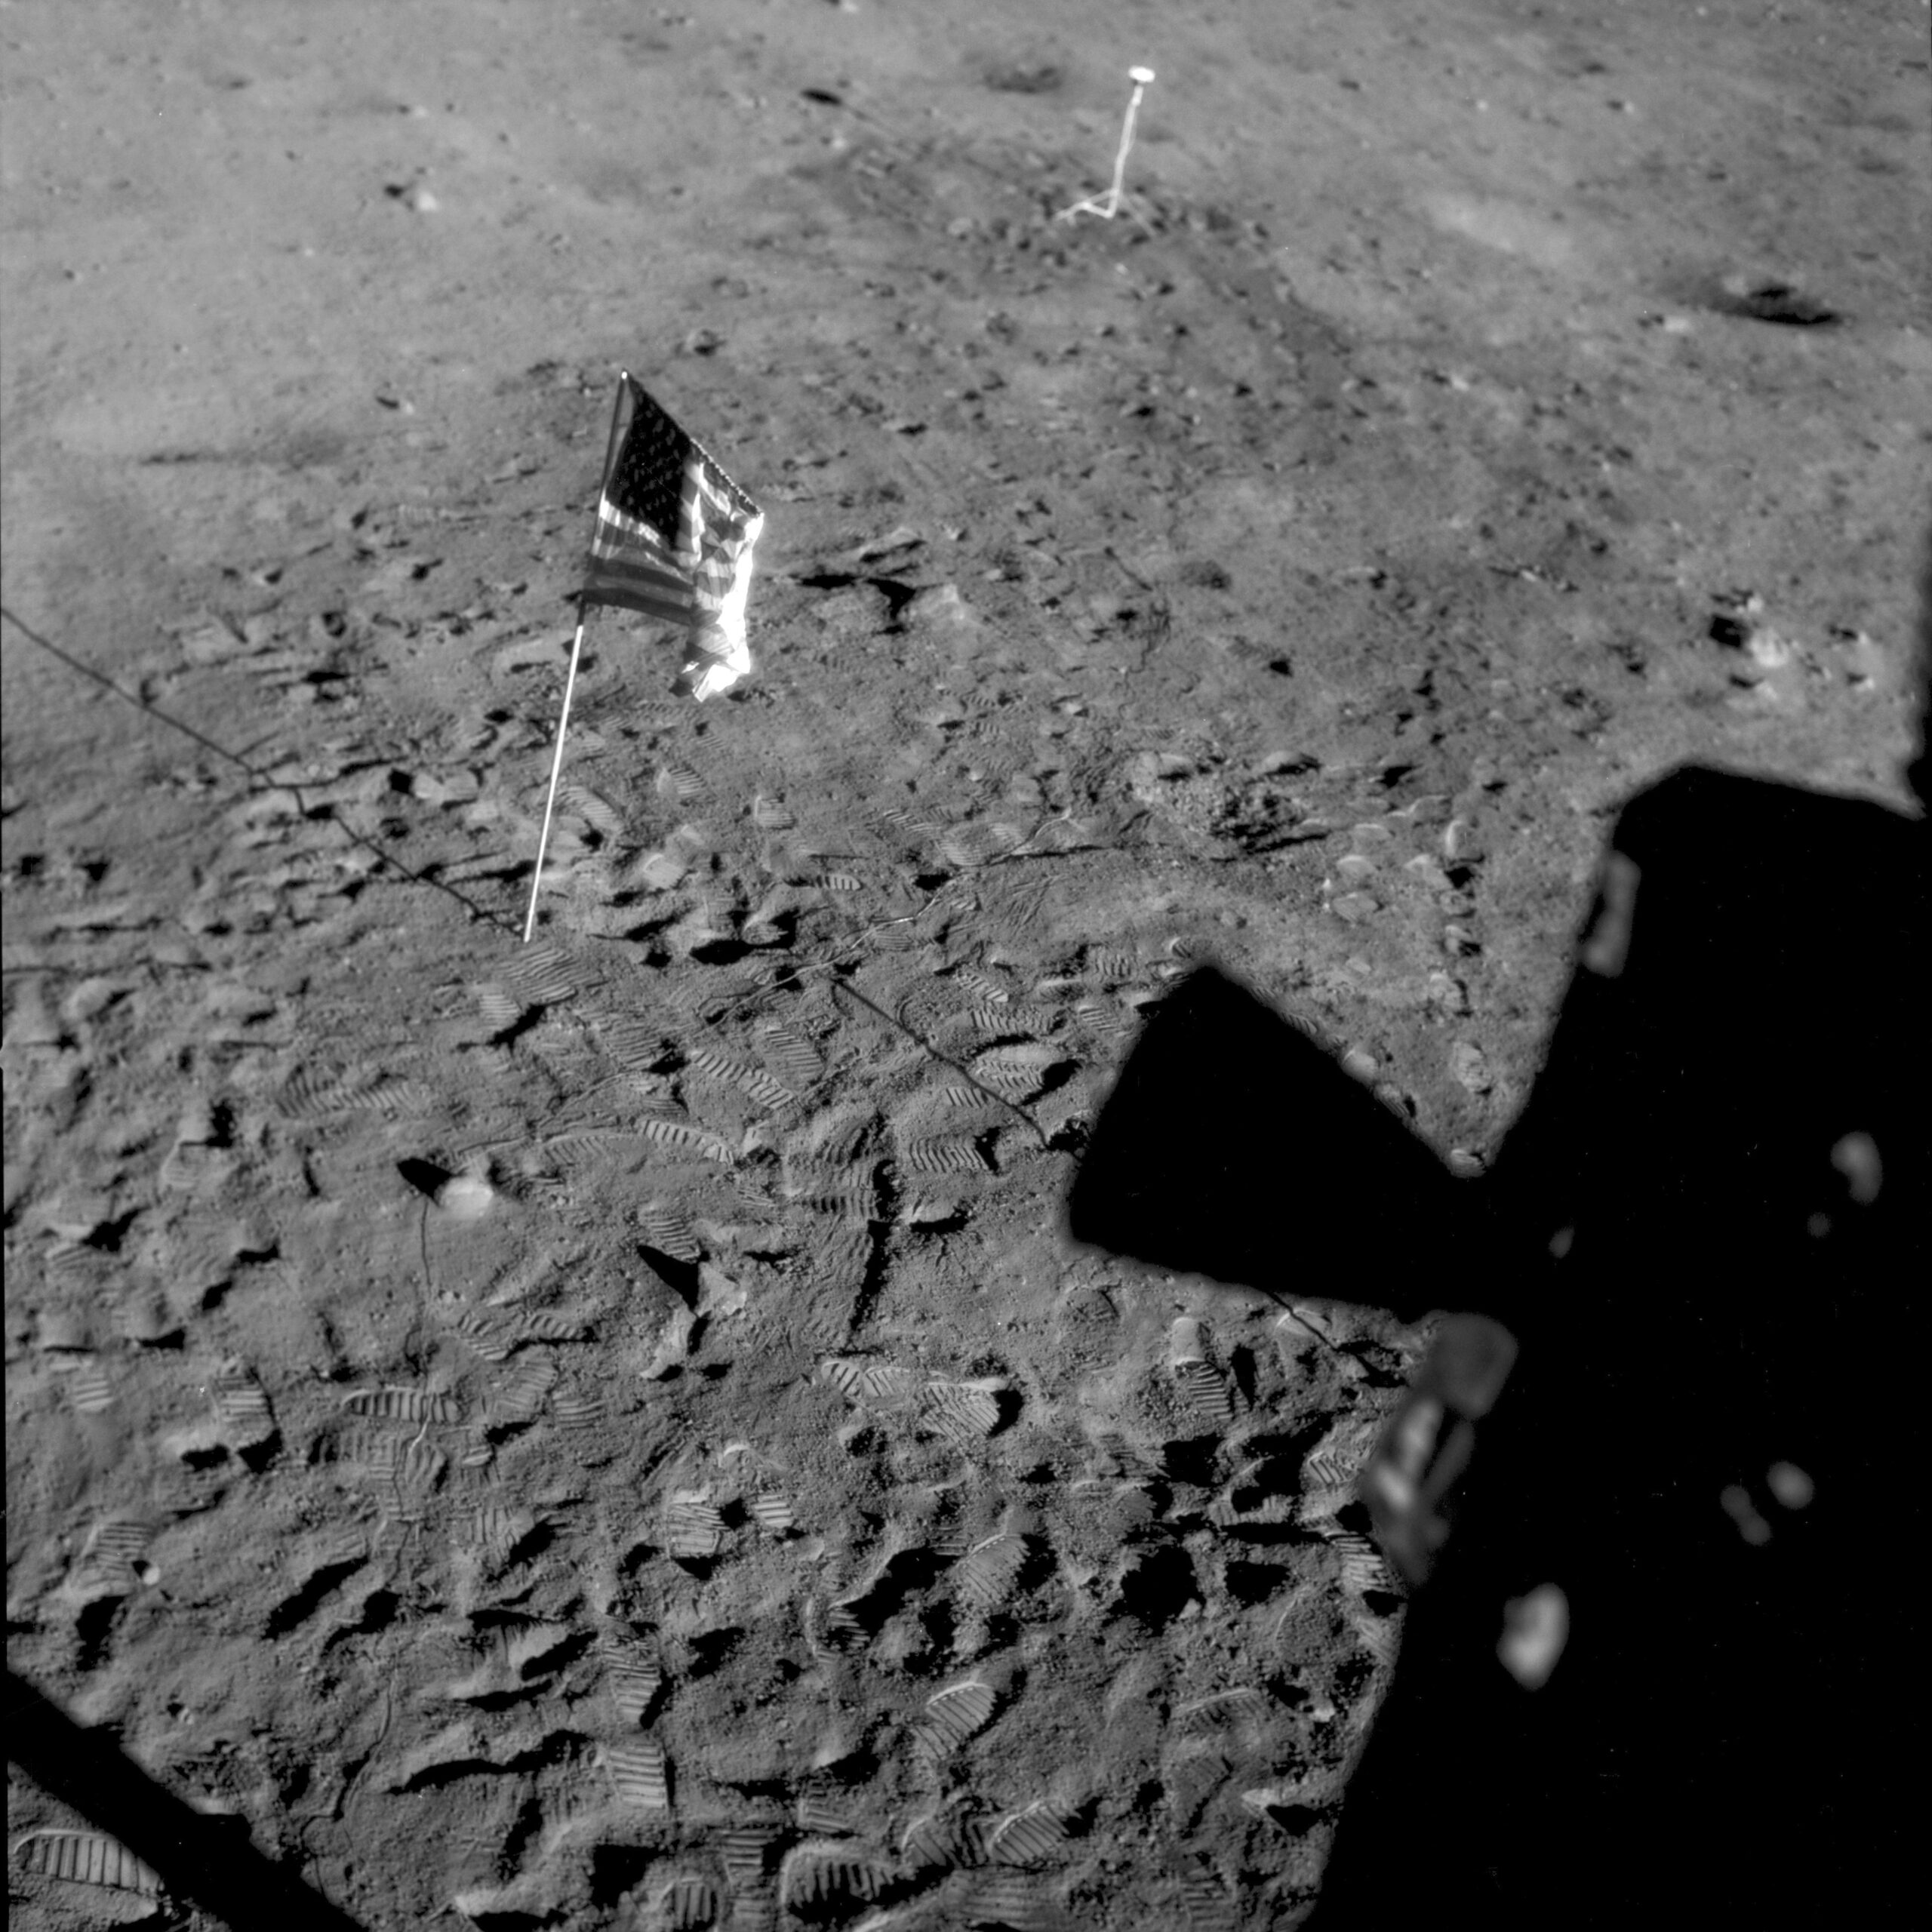 FILE - This July 21, 1969 photo made available by NASA shows a U.S. flag planted at Tranquility Base on the surface of the moon, and a silhouette of a thruster at right, seen from a window in the Lunar Module. On Tuesday, Nov. 9, 2021, NASA announced it is delaying putting astronauts back on the moon until 2025 at the earliest. (NASA via AP, File)